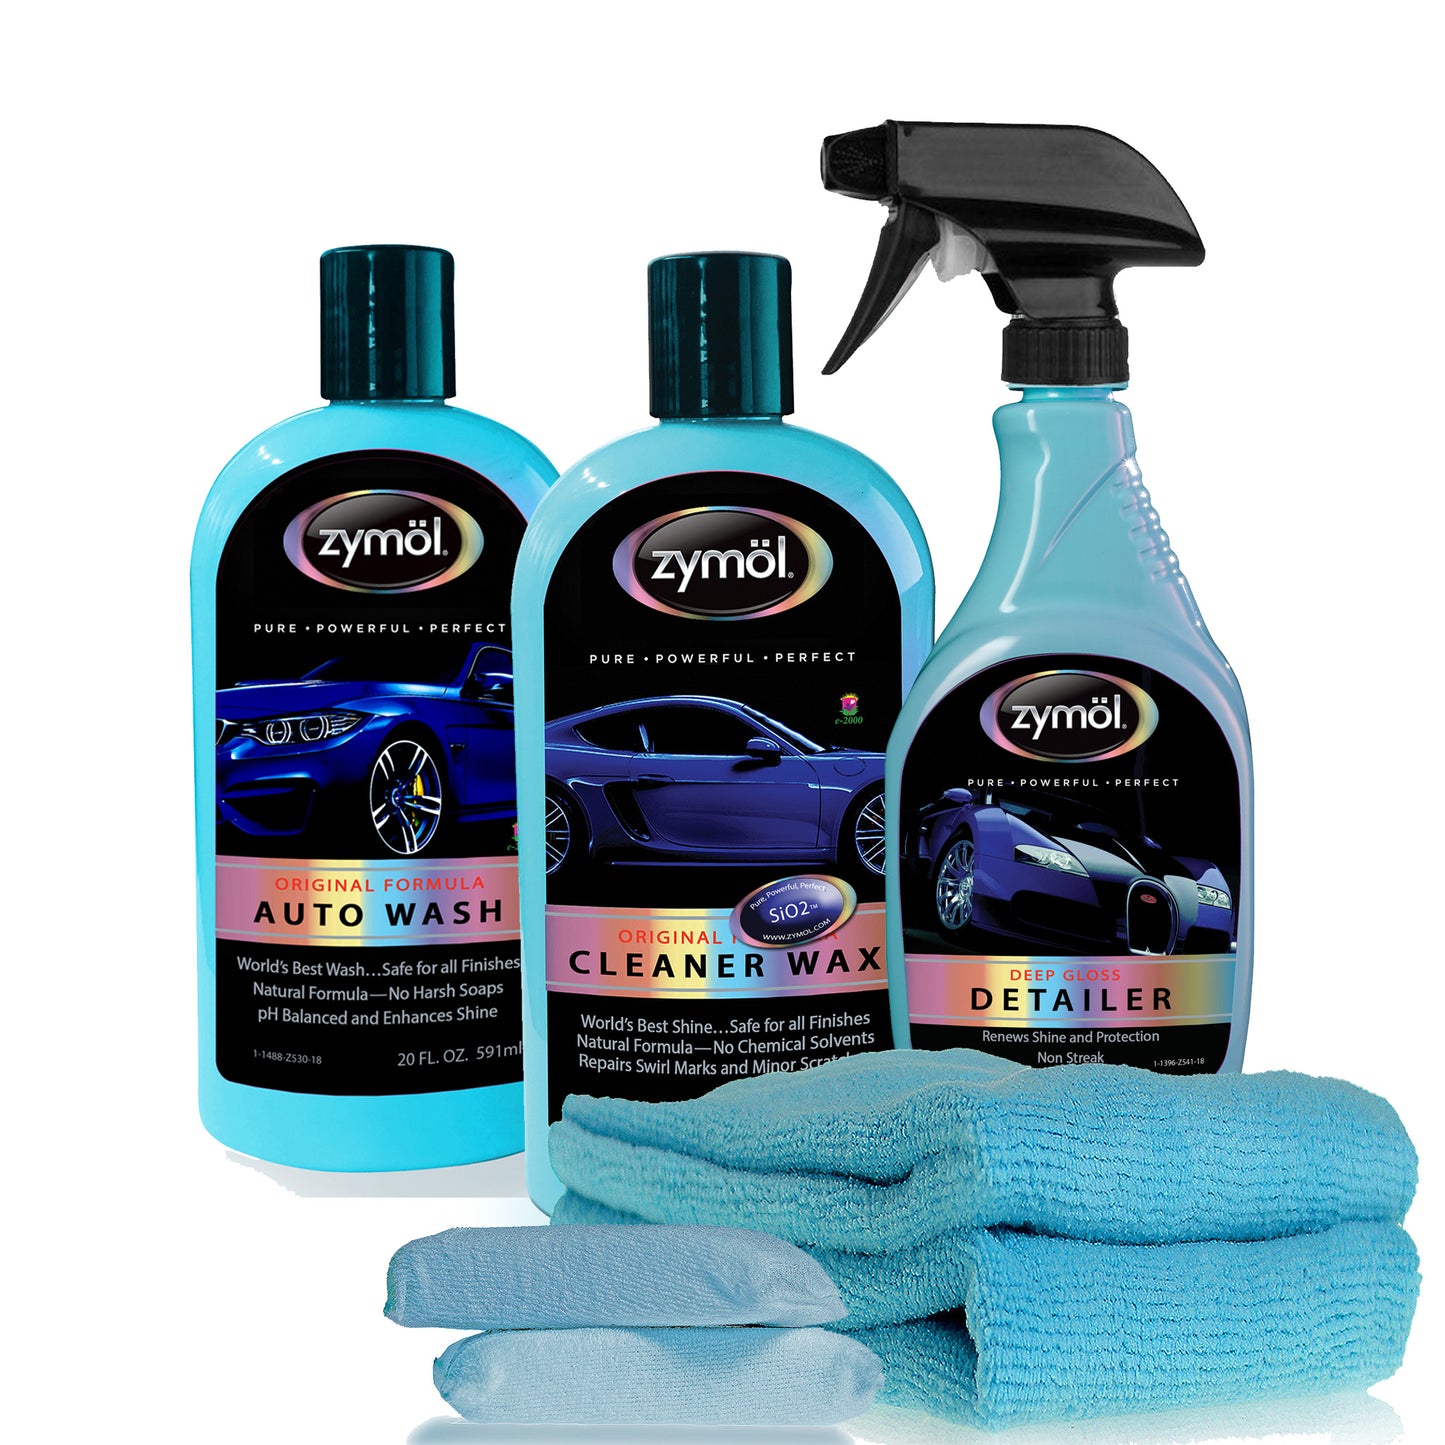 Starter Kit™ Wash and Shine made easy